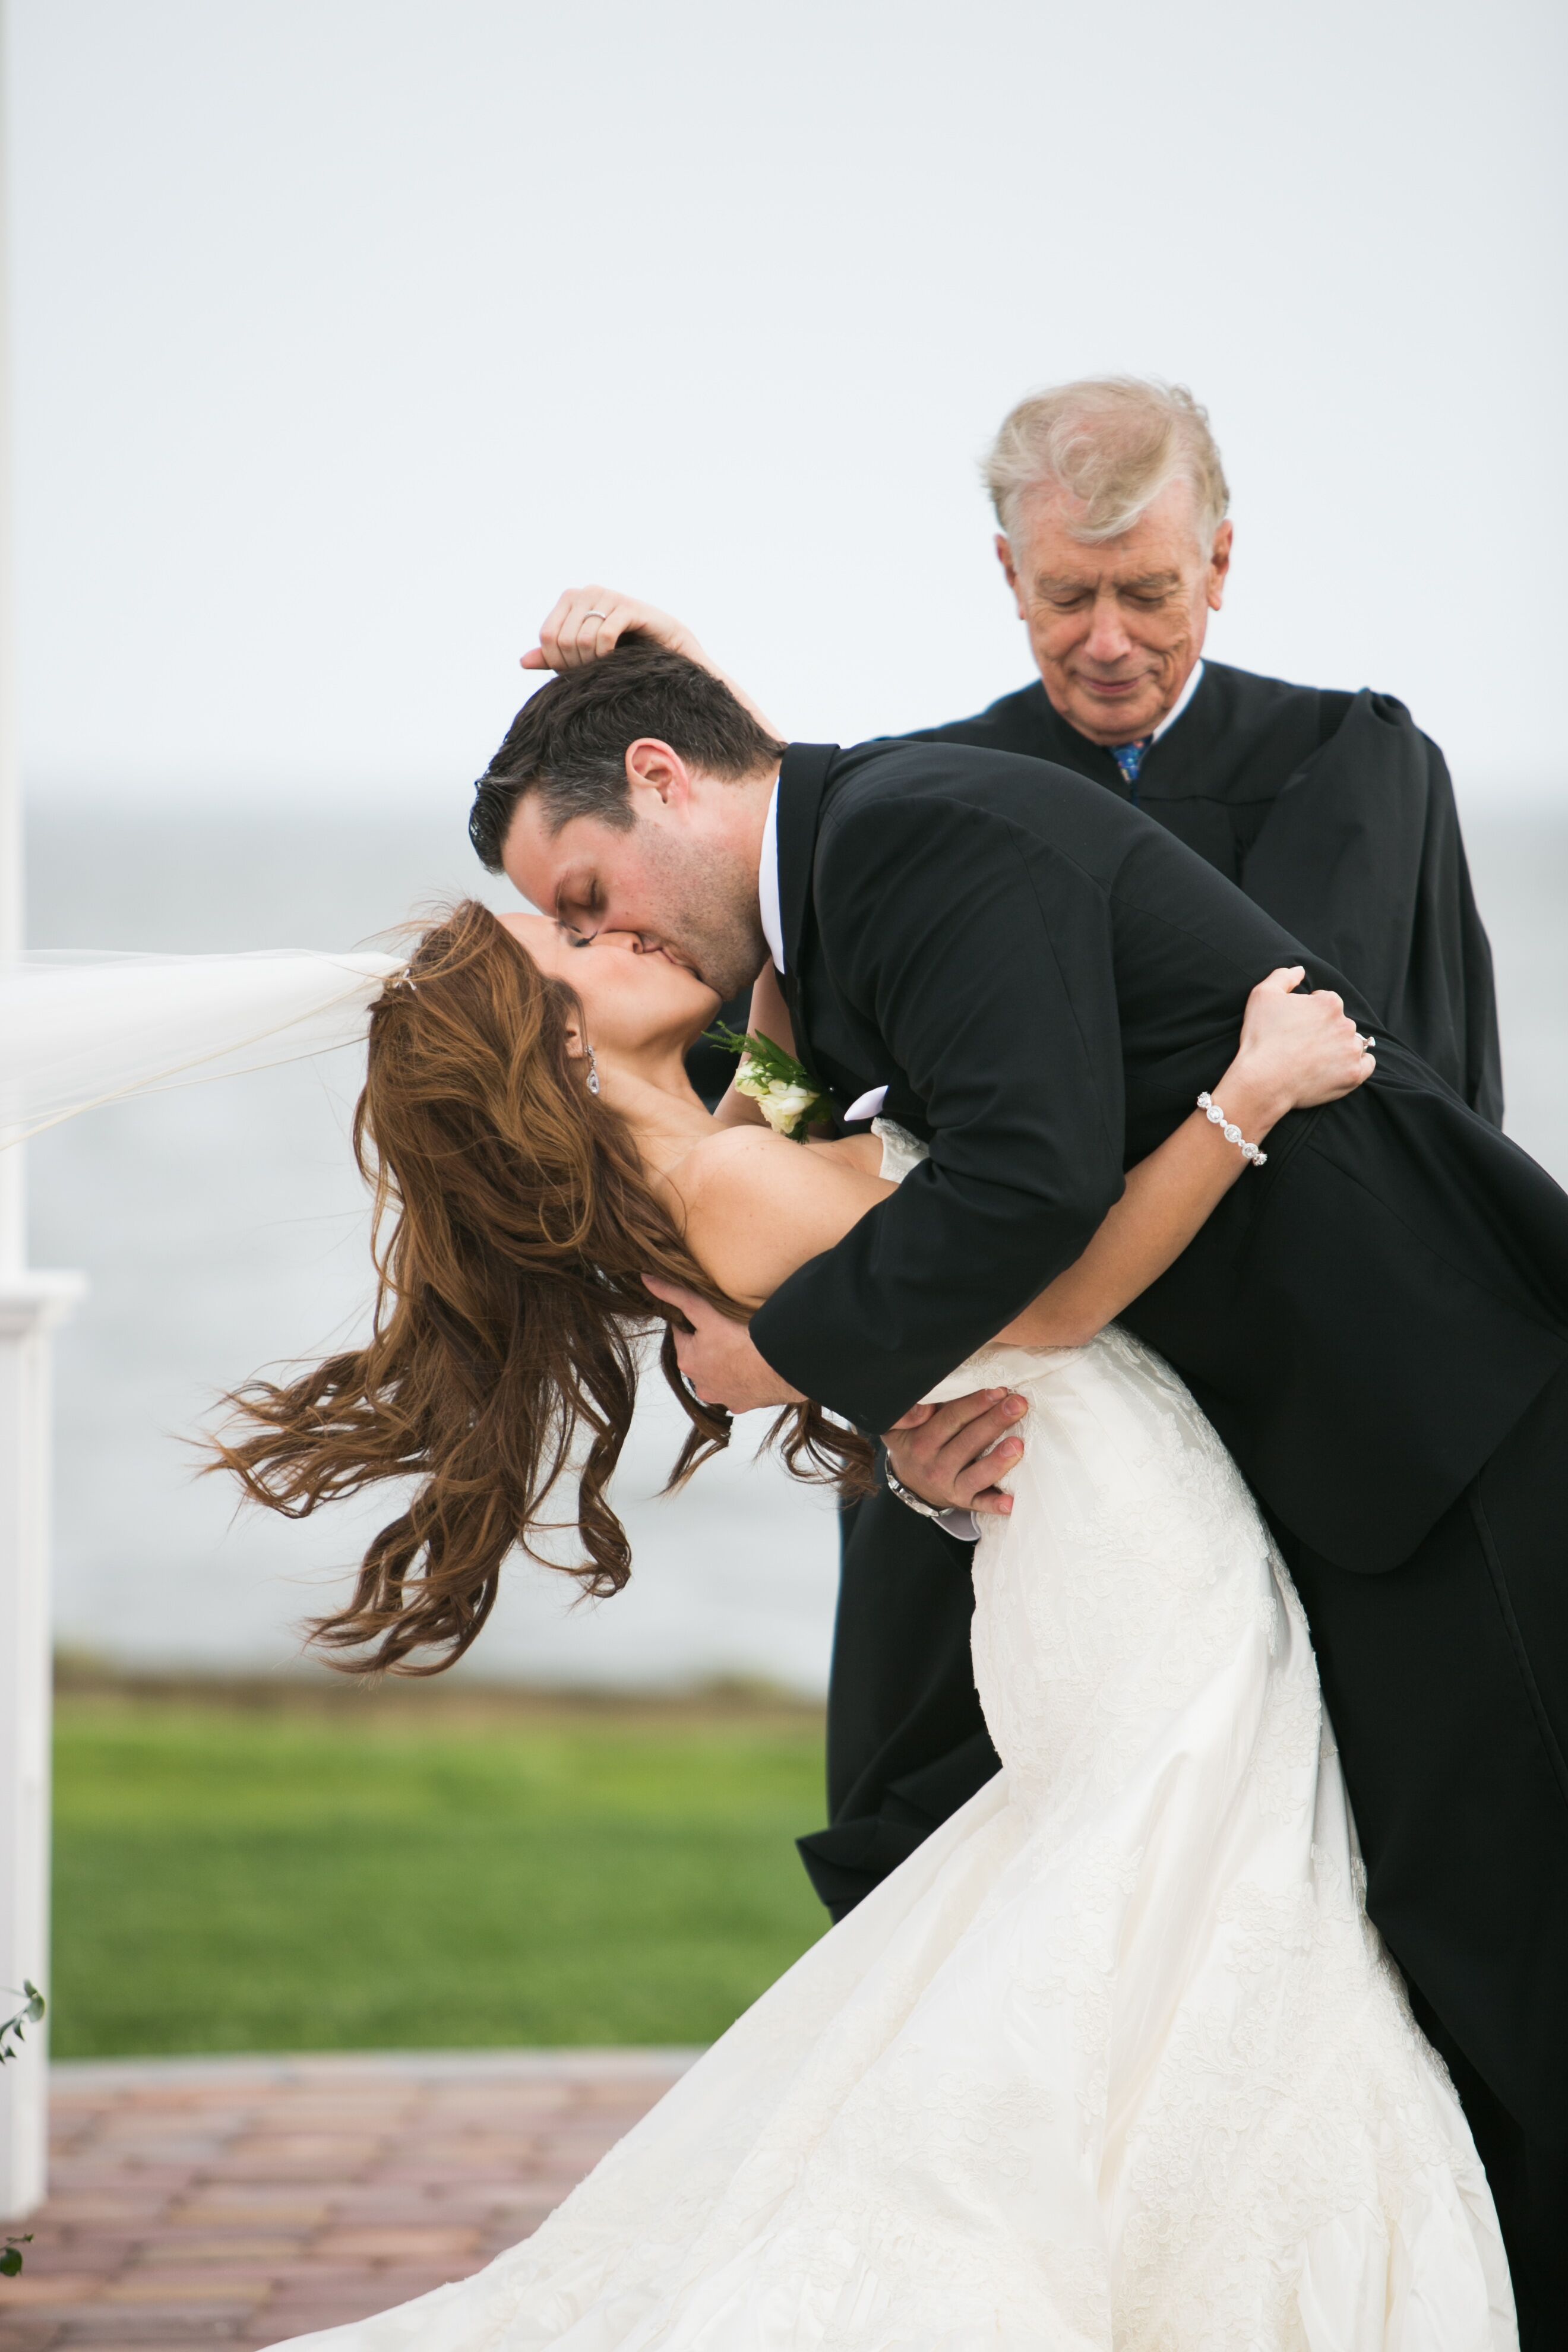 First Kiss At Rehoboth Beach Wedding Ceremony 